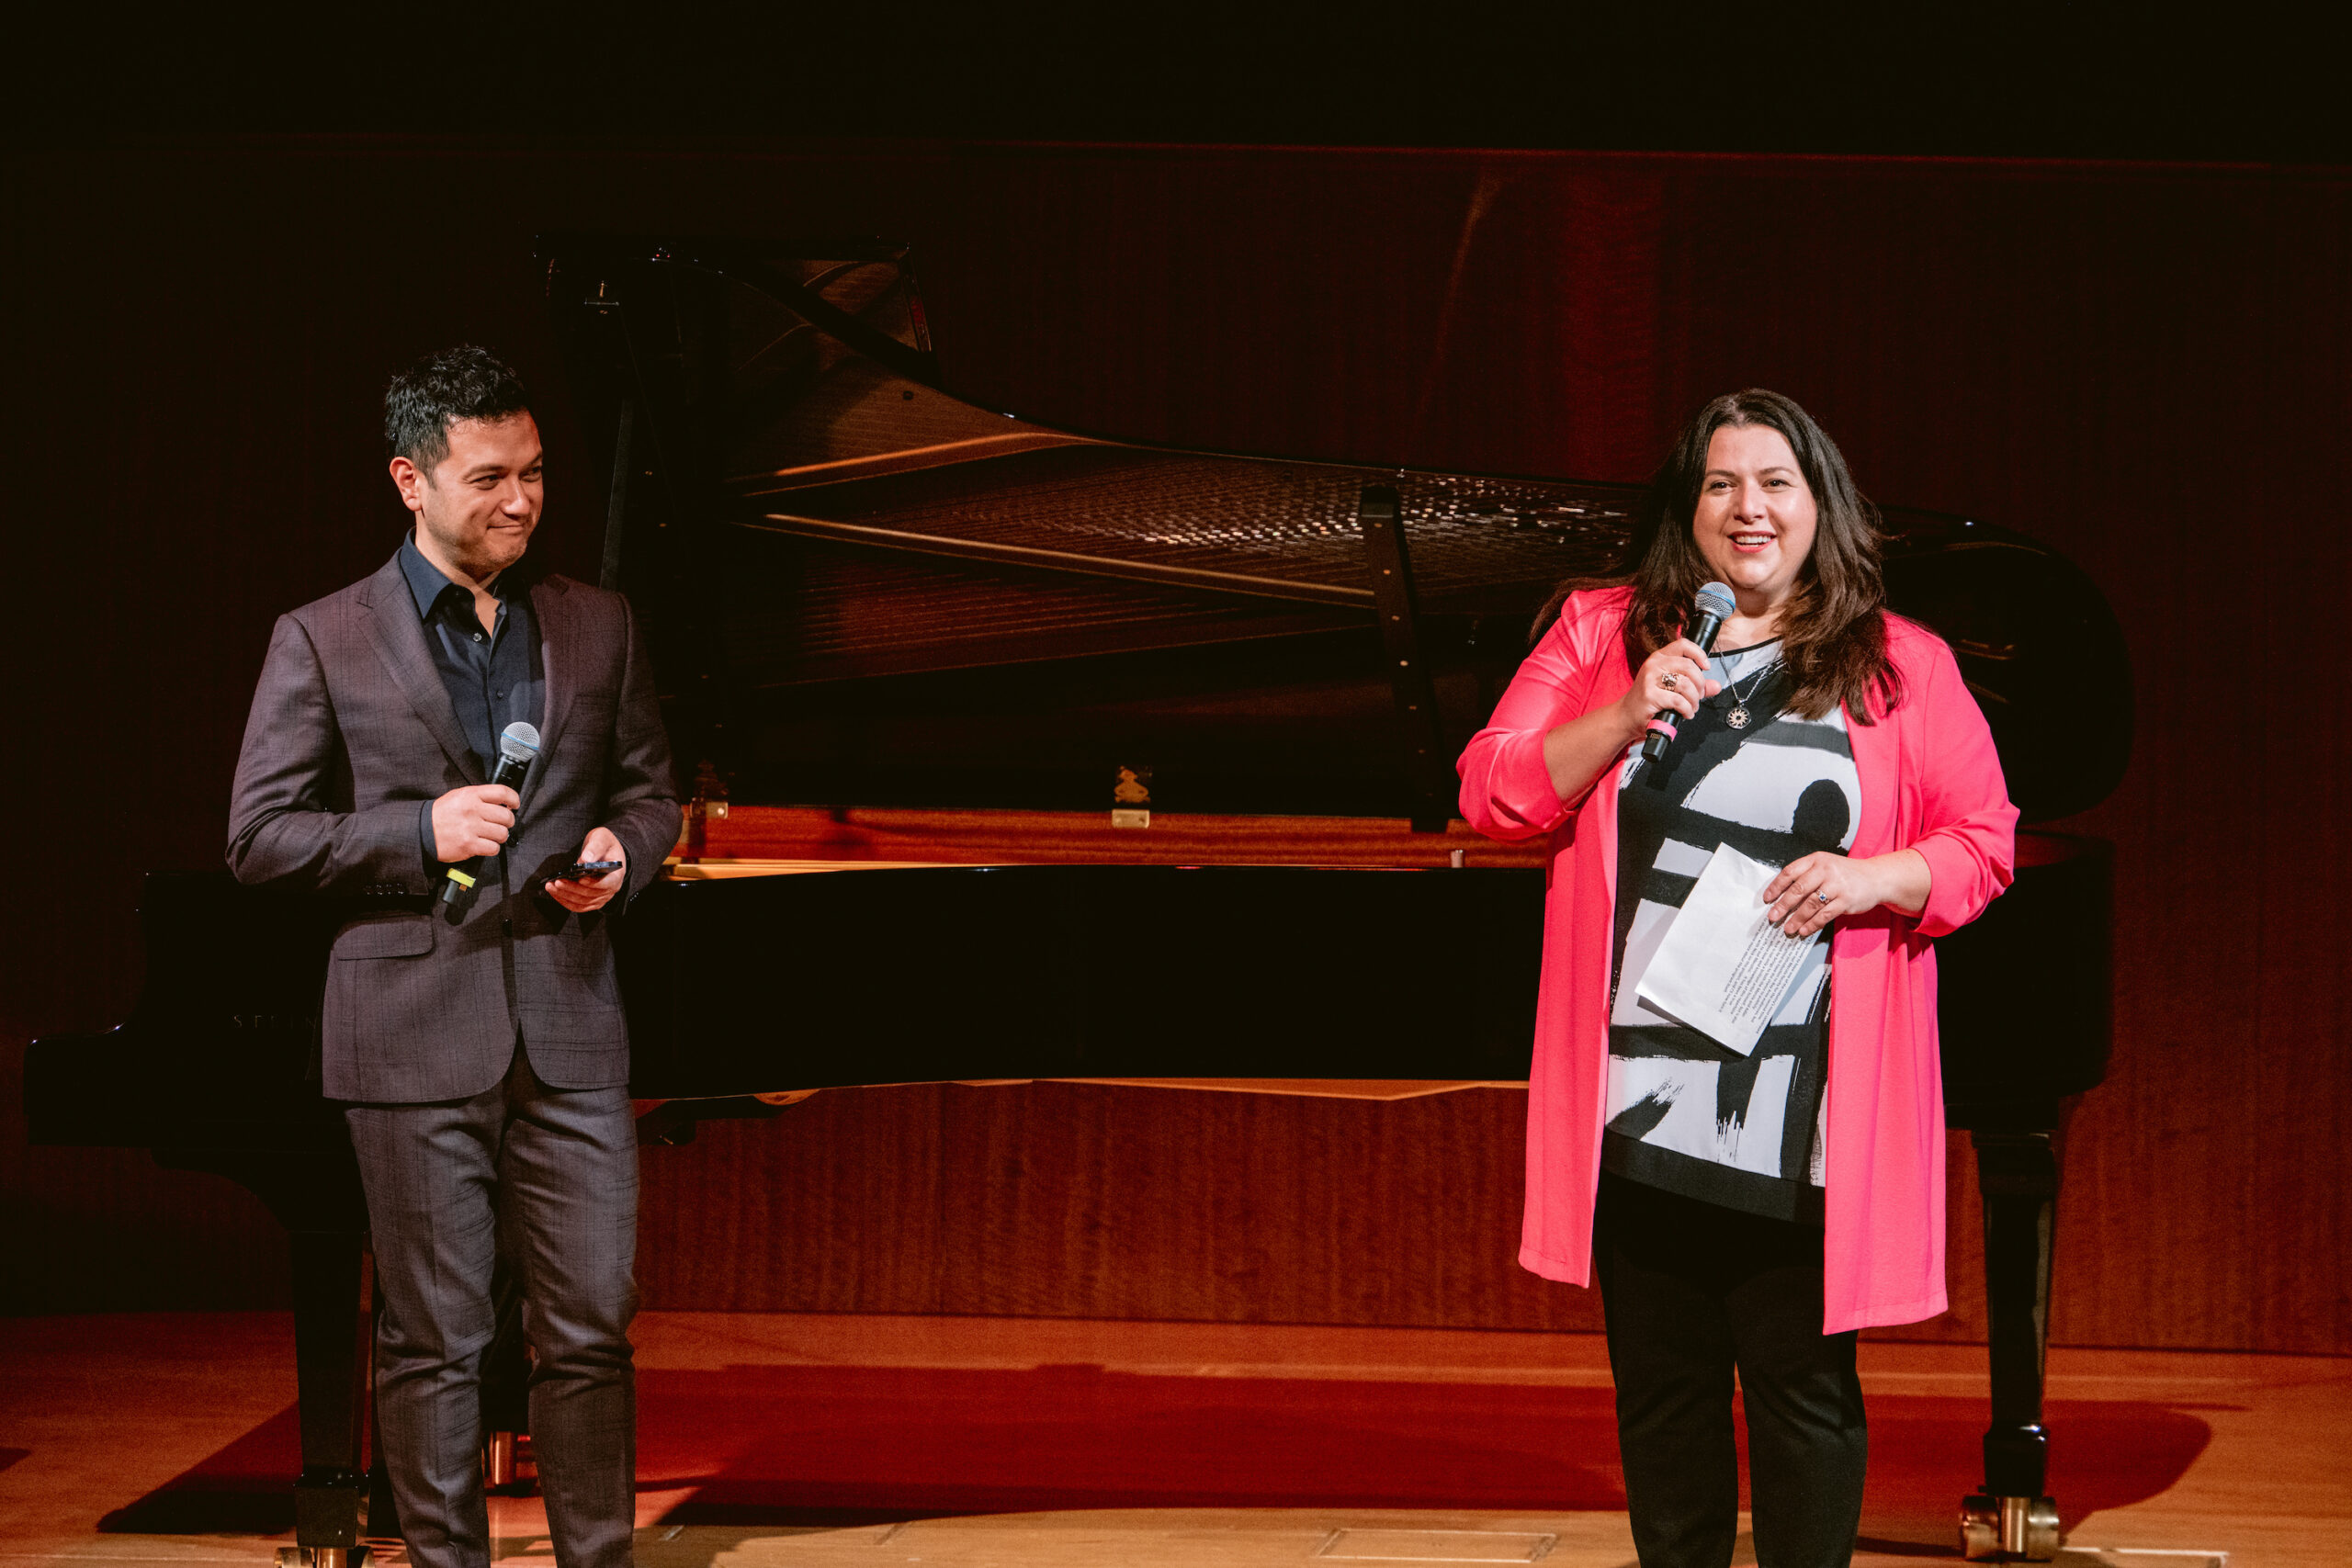 Tenor Nicholas Phan and Carrie-Ann Matheson, San Francisco Opera Center Artistic Director, co-curators of Merola Opera Program's uplifting vocal and piano concert, "Metamorphosis: Recovery, Renewal, and Rebirth,"